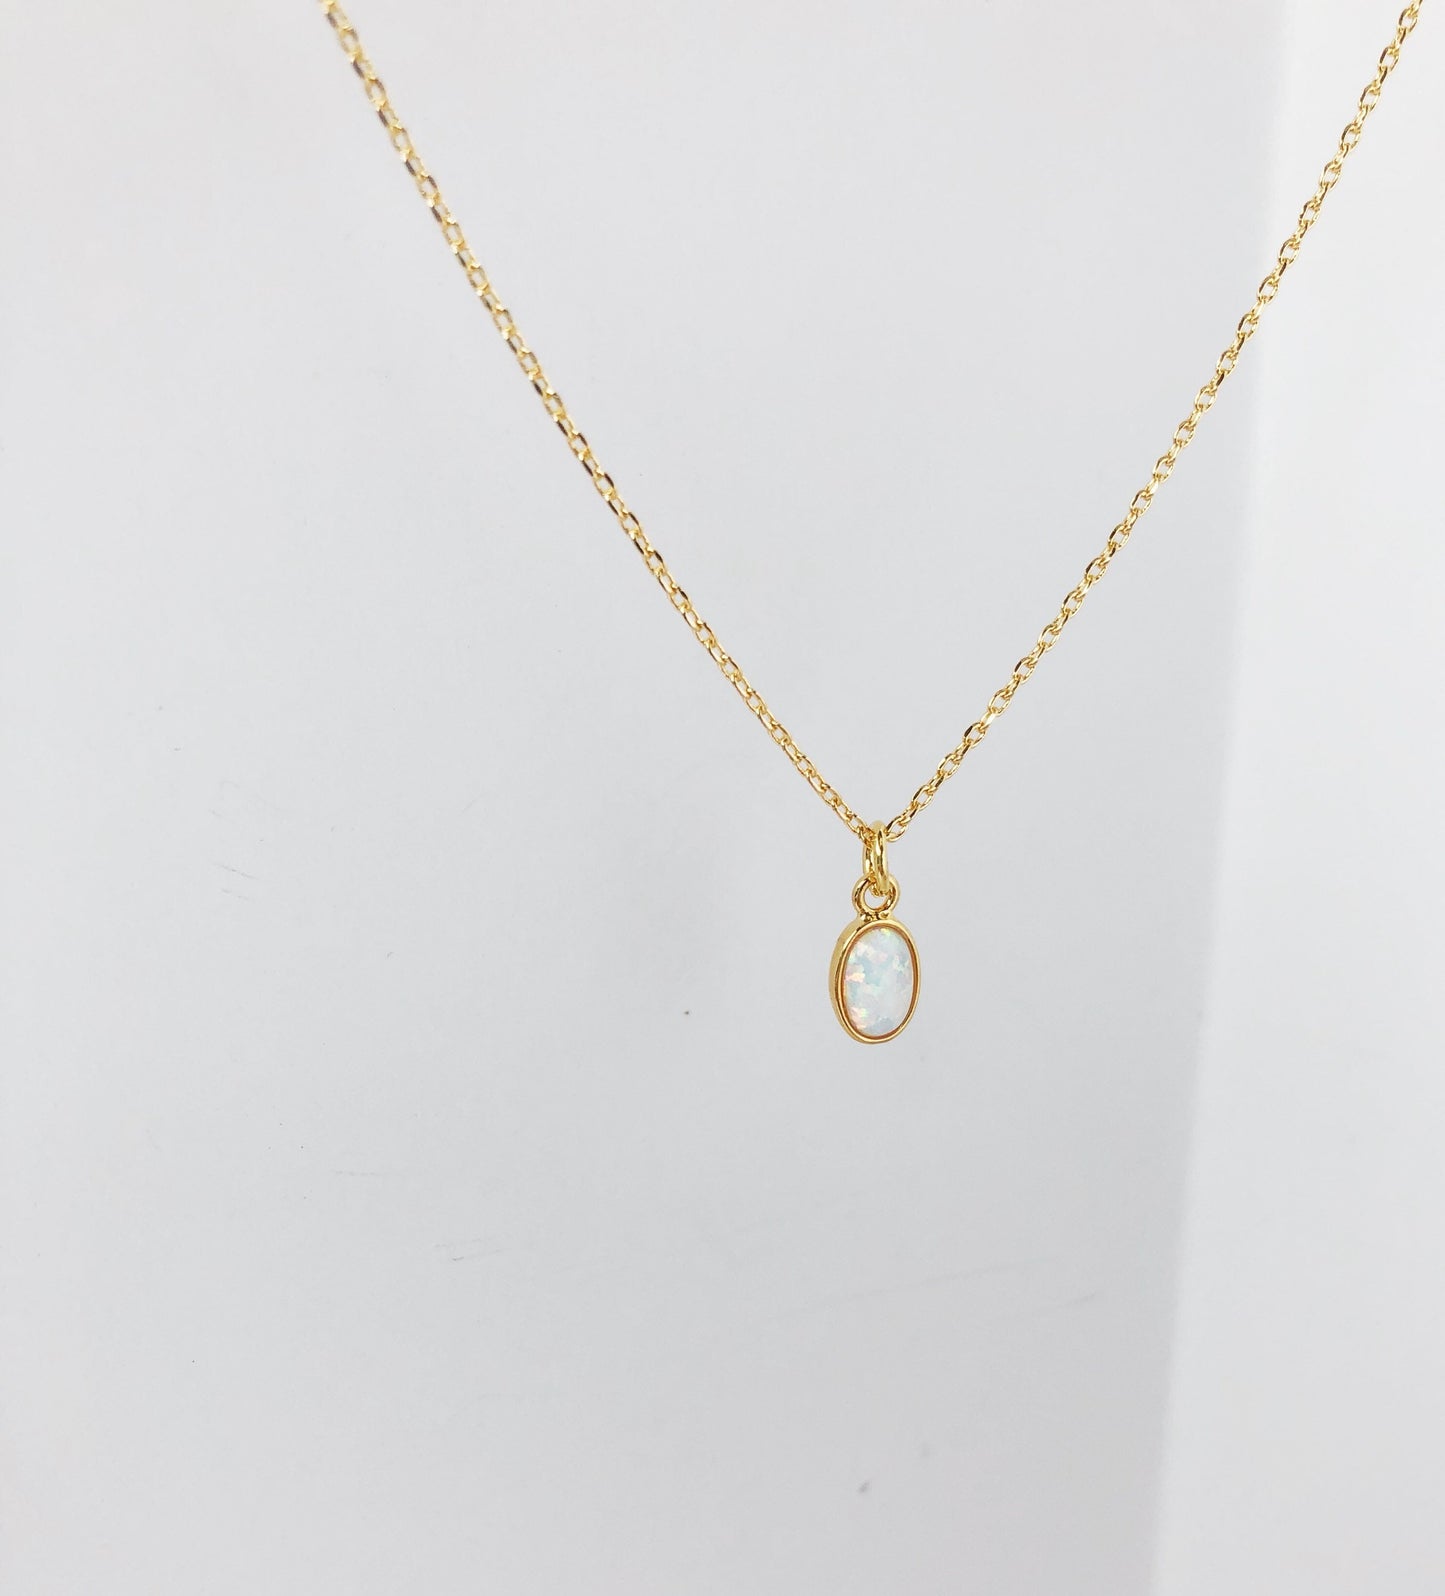 Opal necklace, Gold necklace, dainty gold  necklace, october birthstone, Dainty jewelry, jewelry, birthday gifts for her, simple necklace